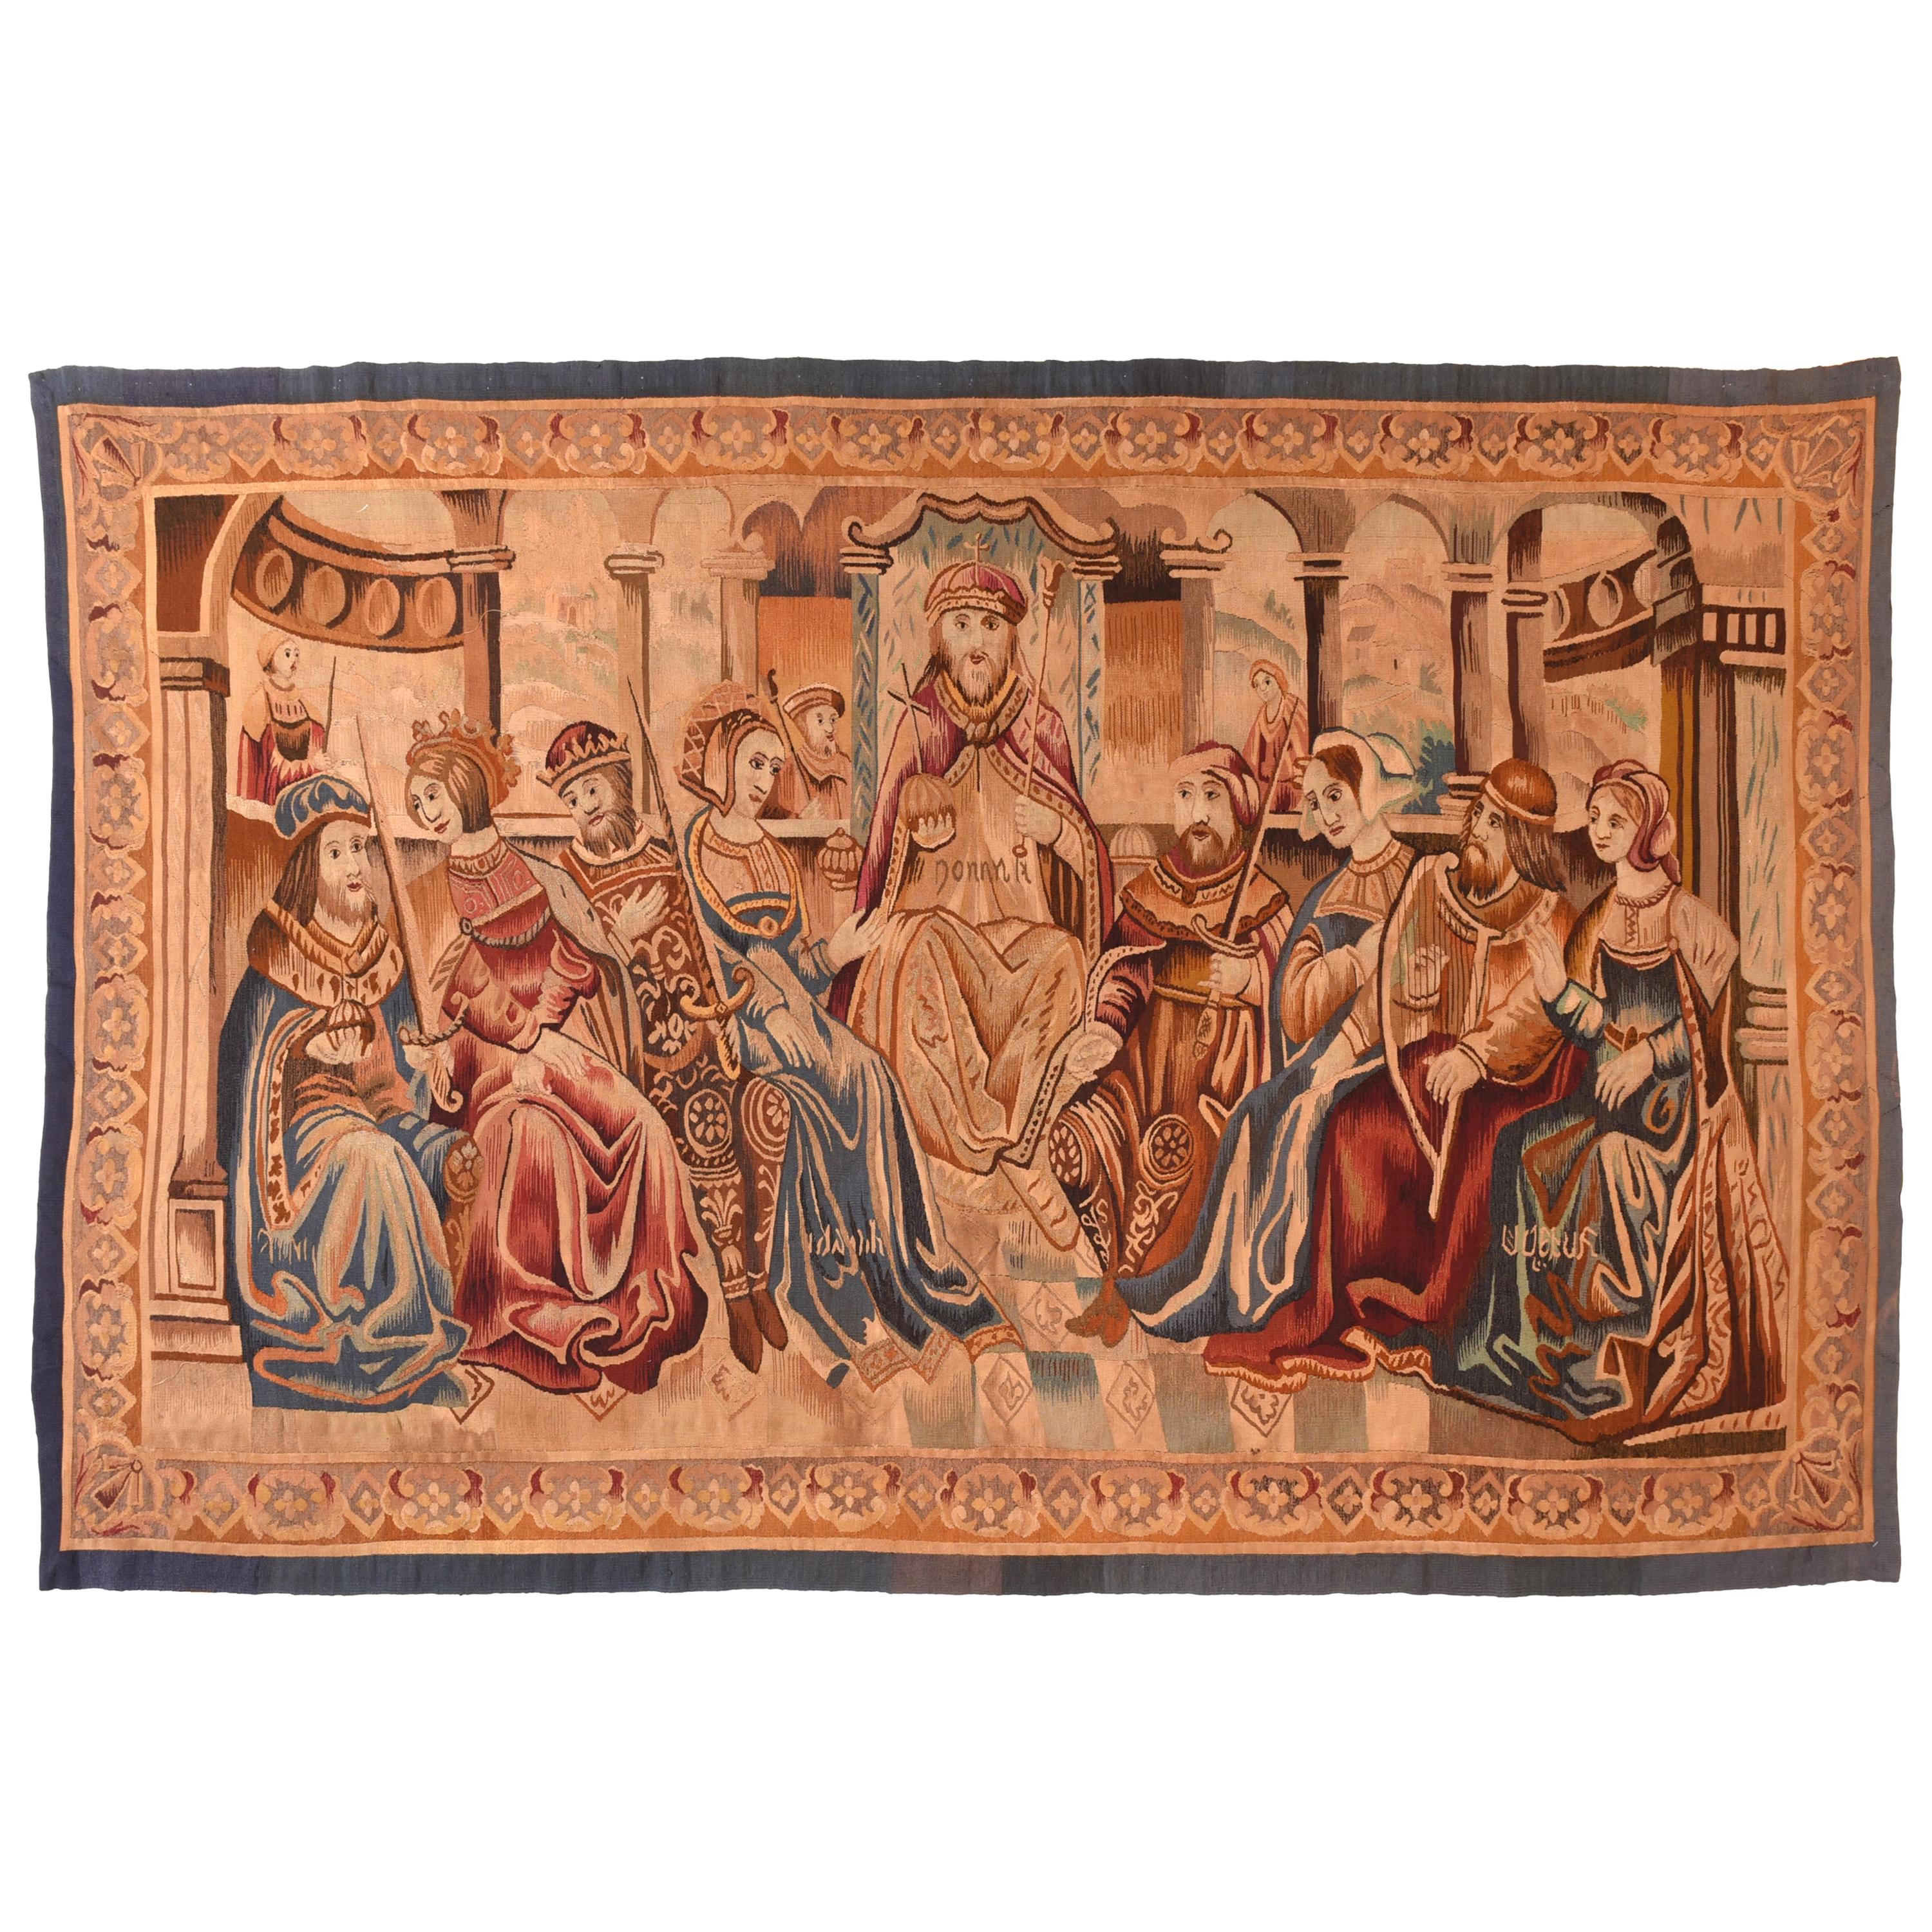 Extremely Fine Antique Pictorial Biblical Belgium Tapestry, circa 19th Century